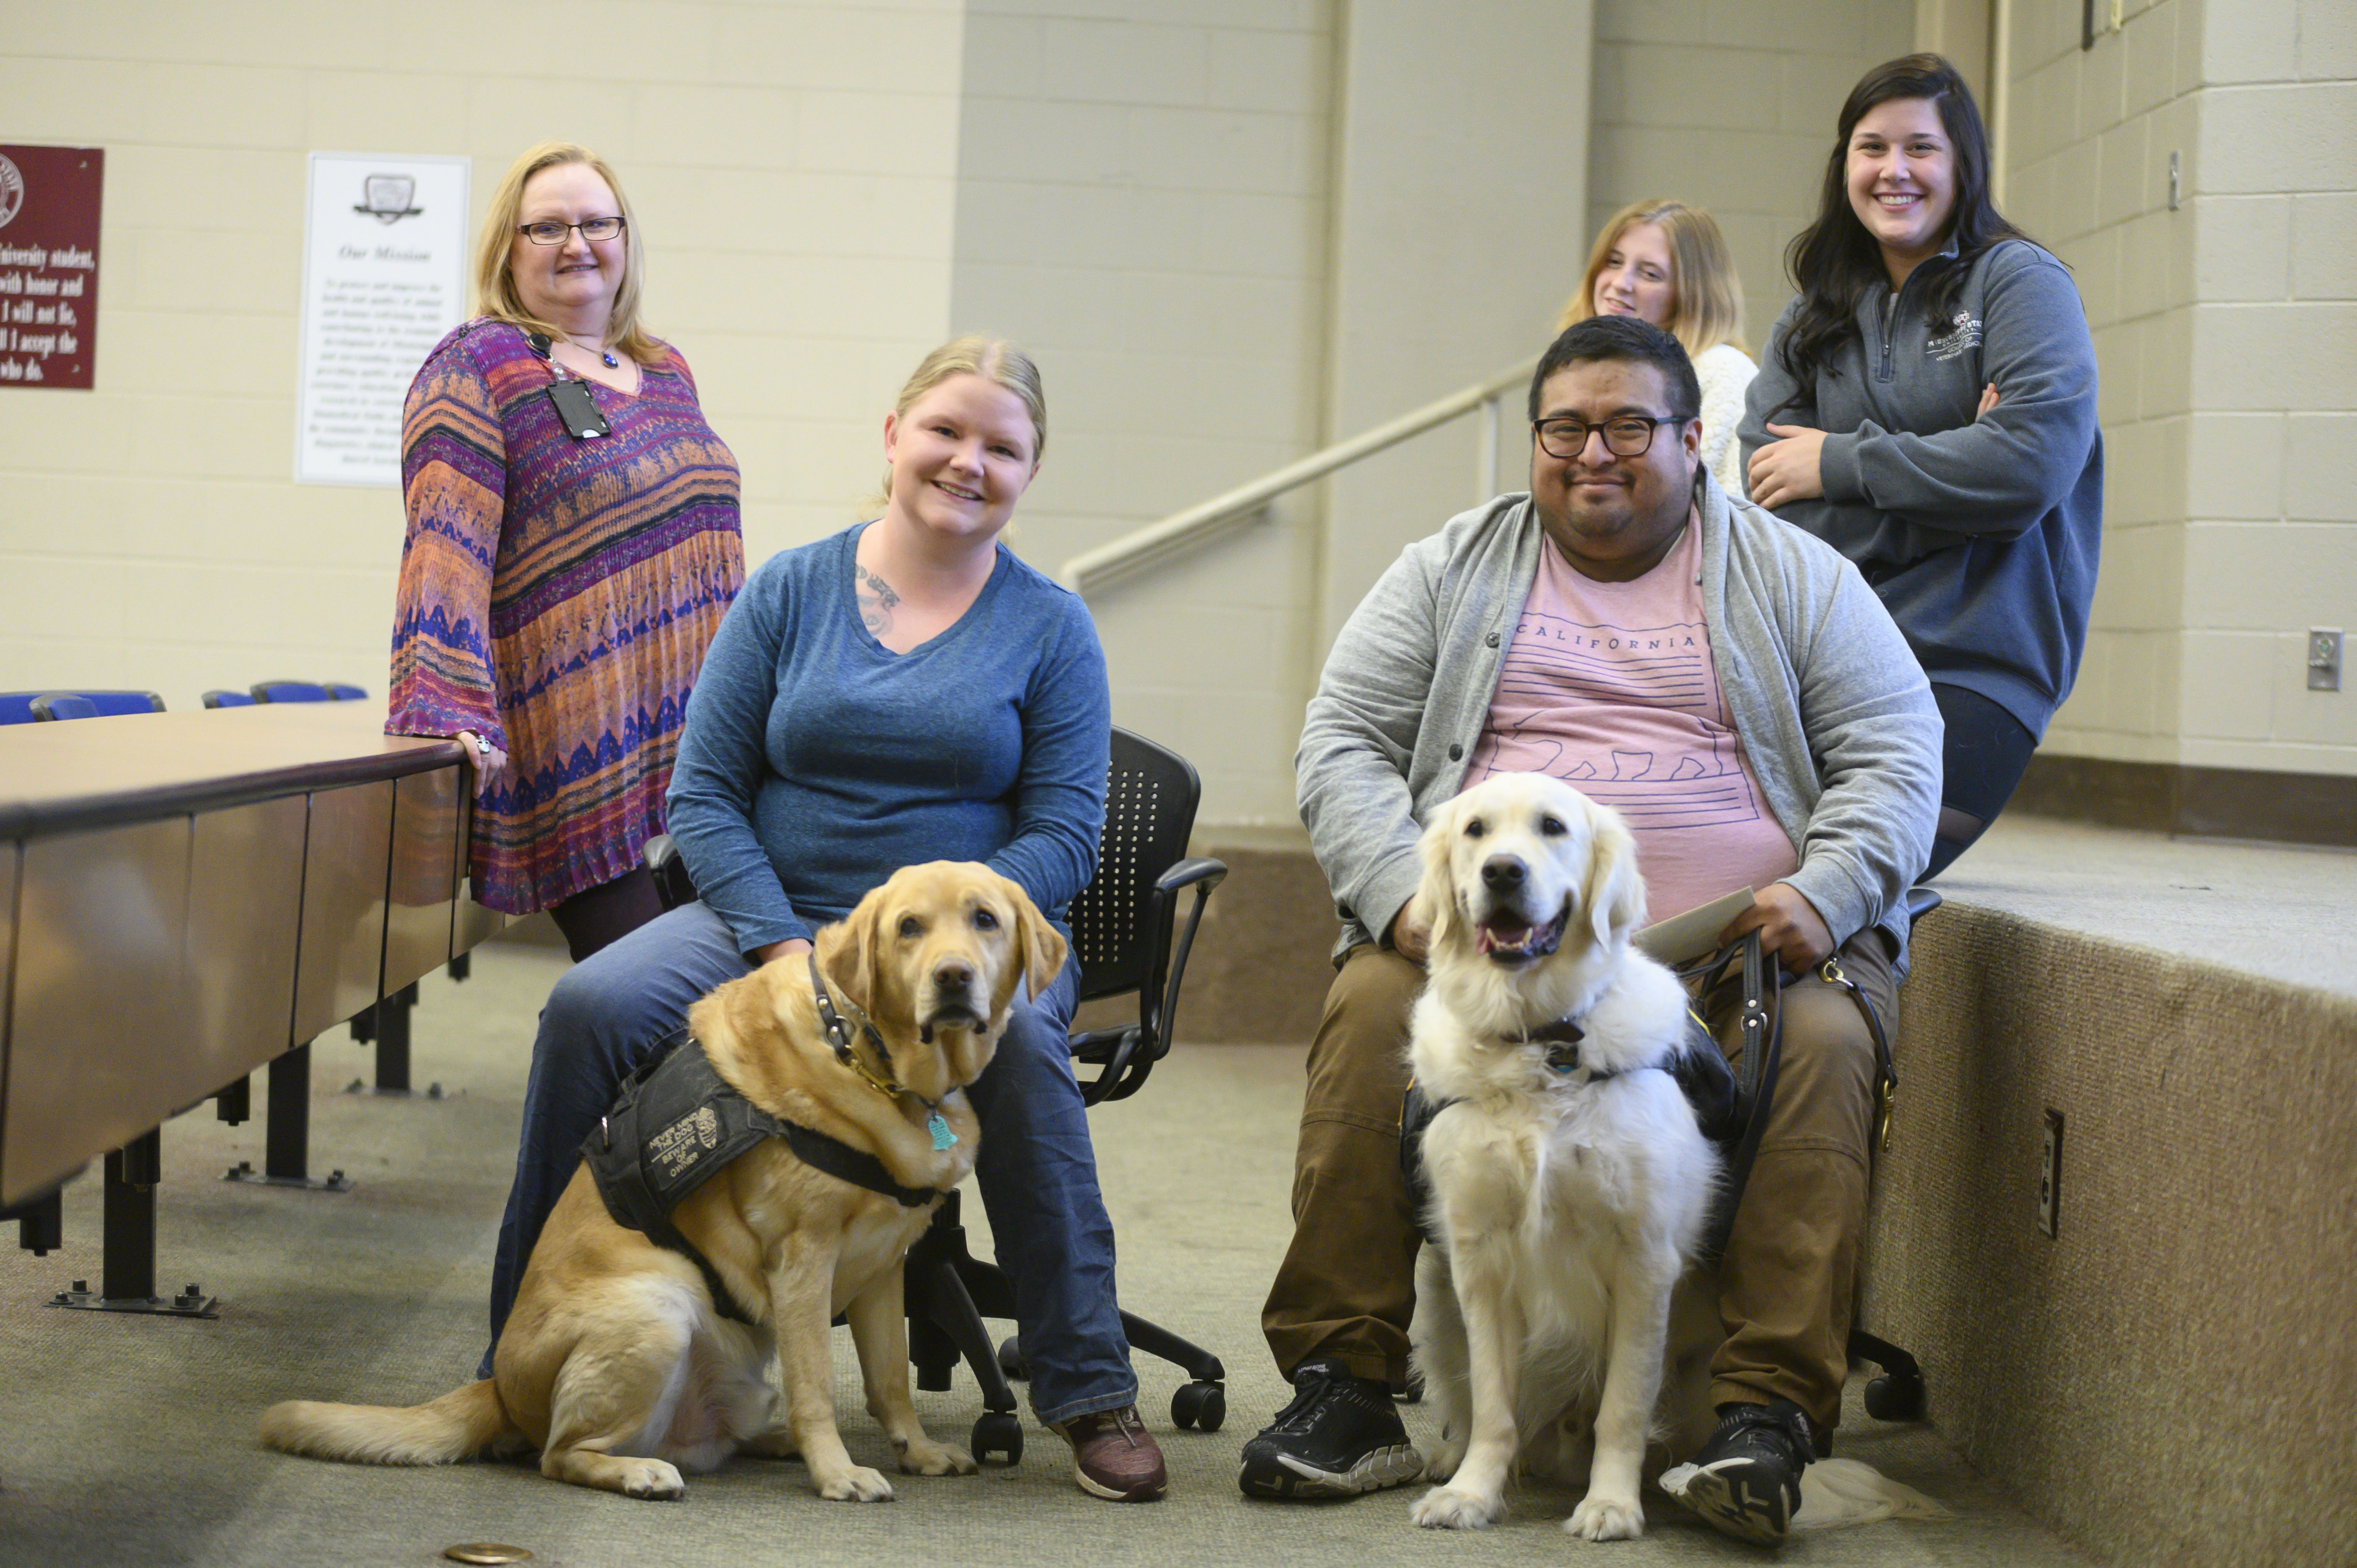 Four people pose with two service dogs